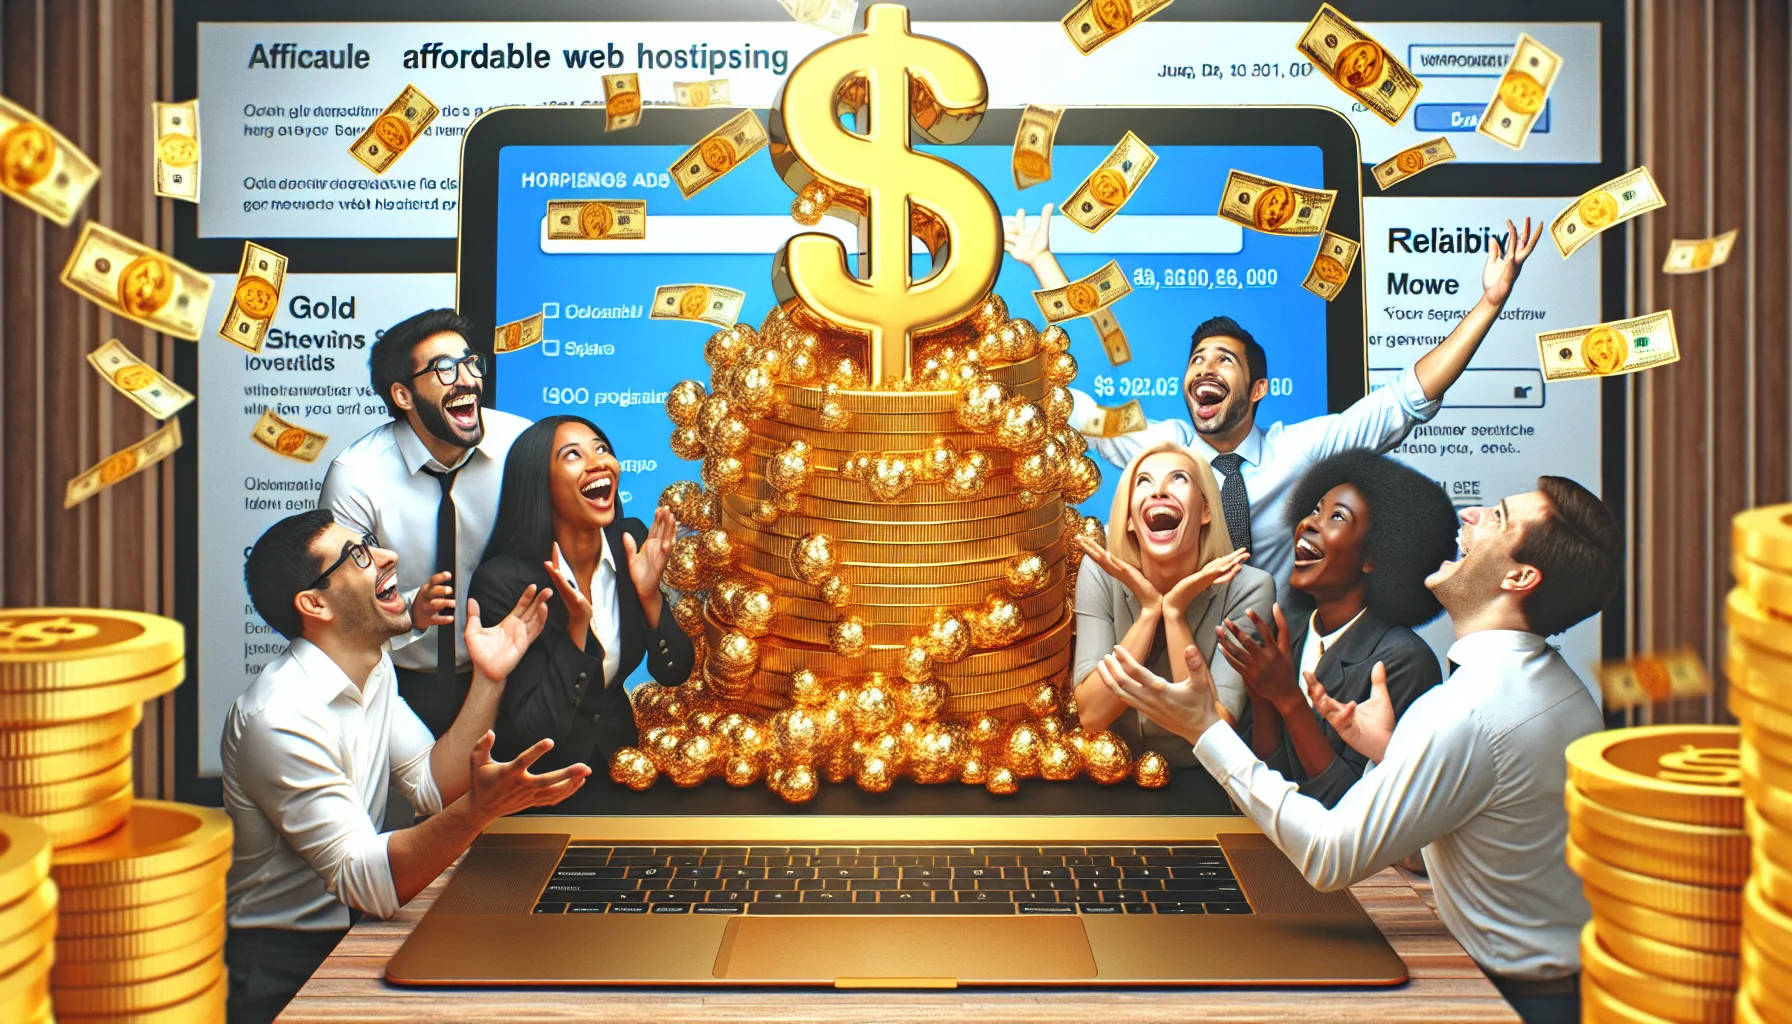 Generate a whimsical image illustrating an interesting scenario involving a web hosting company. Picture a joyous meeting where a team of diverse professionals including a Caucasian female digital marketer, a Middle Eastern male programmer, a Black female SEO specialist, and a South Asian male web designer are all gathered around a colossal, golden laptop. They are visibly excited as they notice huge dollar signs popping out of the laptop screen, symbolizing affordable web hosting. Background ads emphasize the company's affordability, high-quality service, and reliability in a humorous, playful manner.